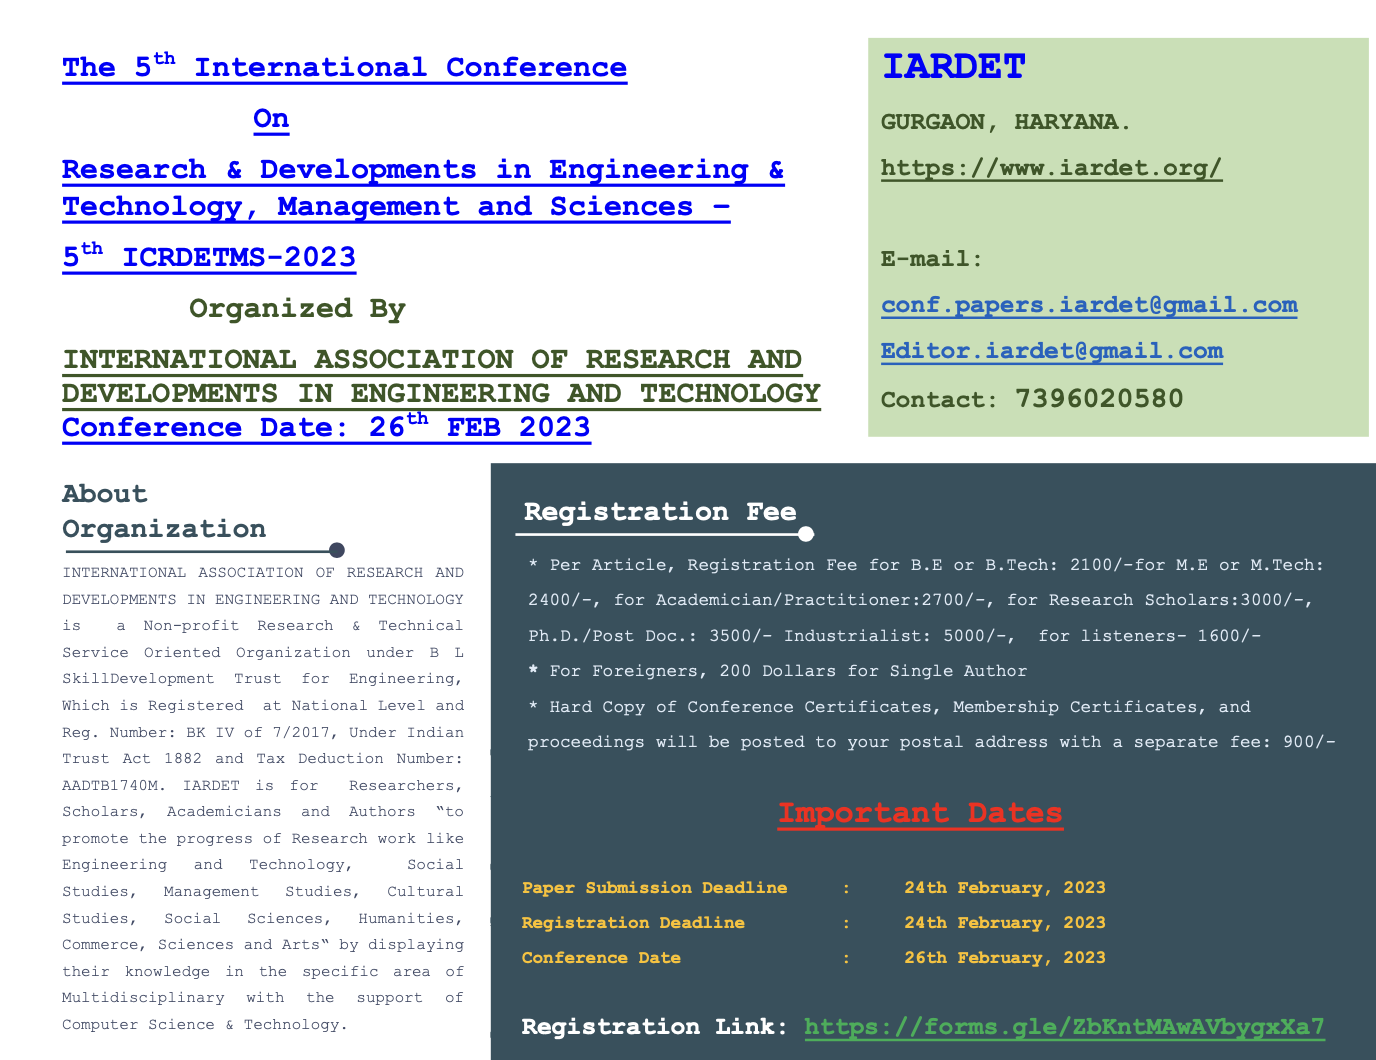 5th International Conference On Research and Developments in Engineering and Technology, Management and Sciences ICRDETMS 2023